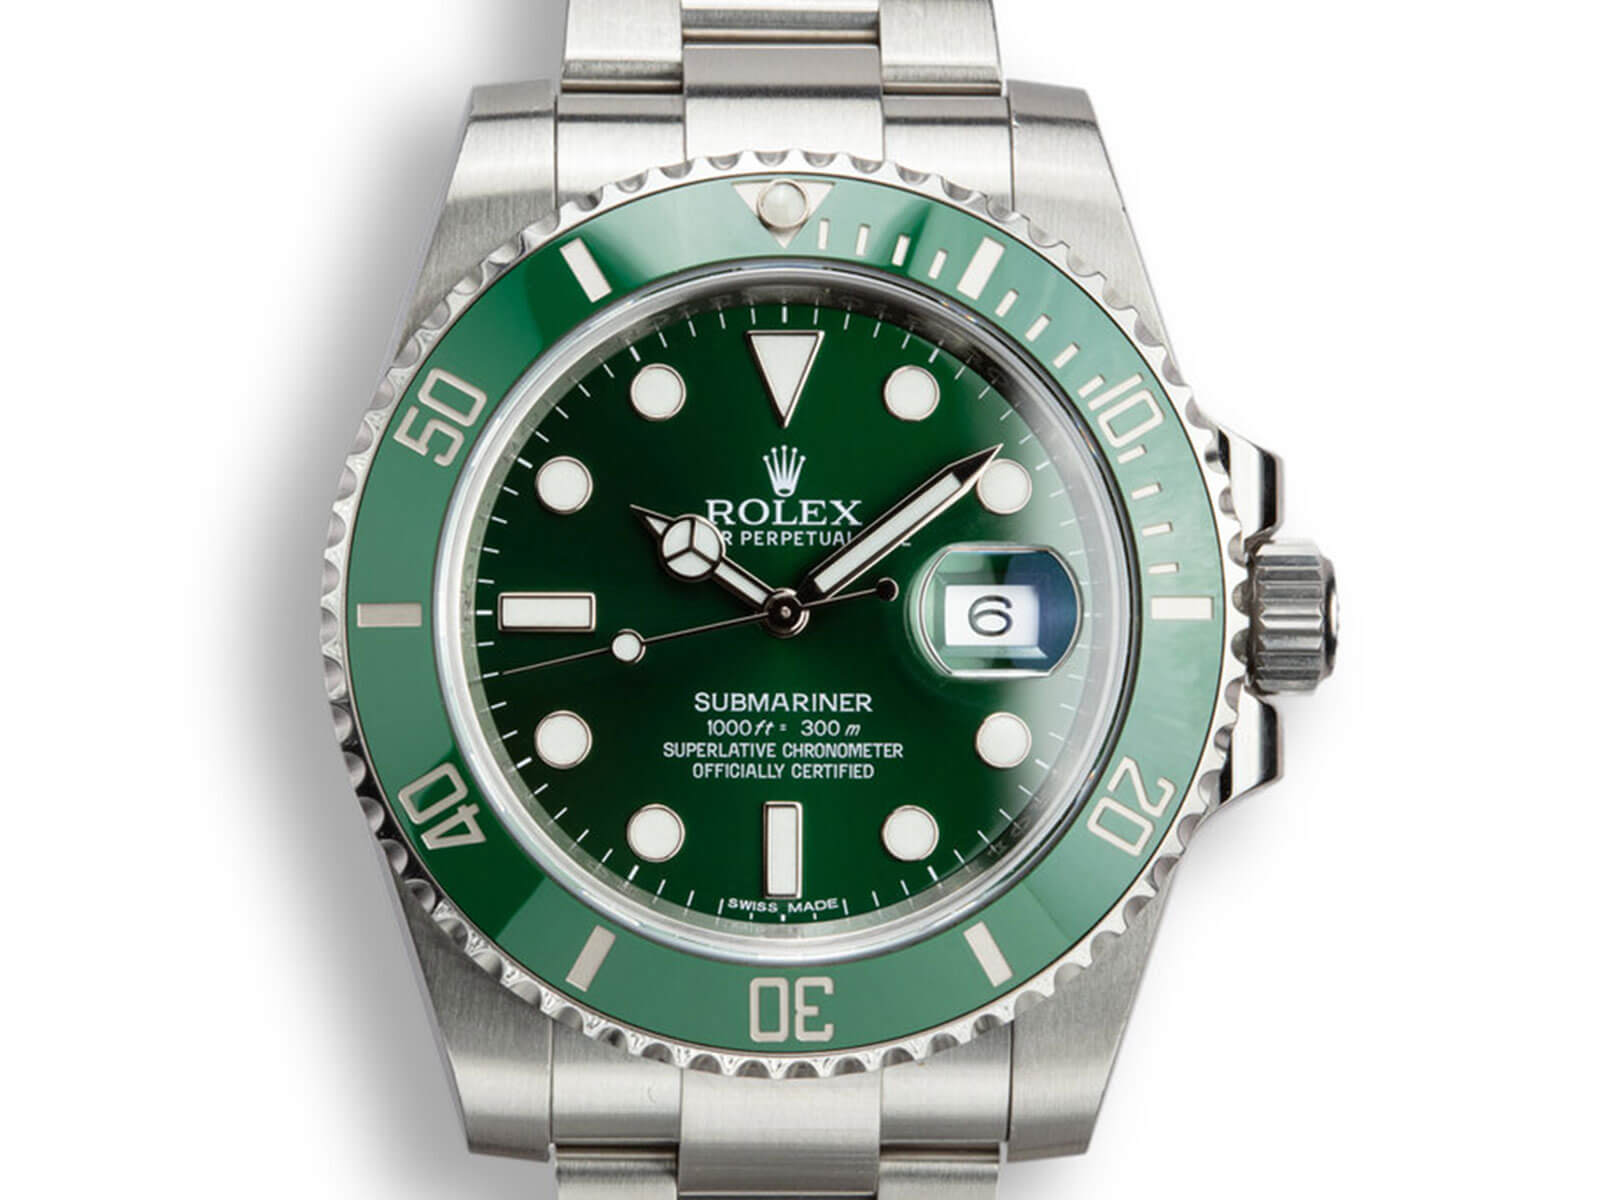 Rolex Submariner Date 116610LV is the first Rolex model with the Green Cerachrom Bezel